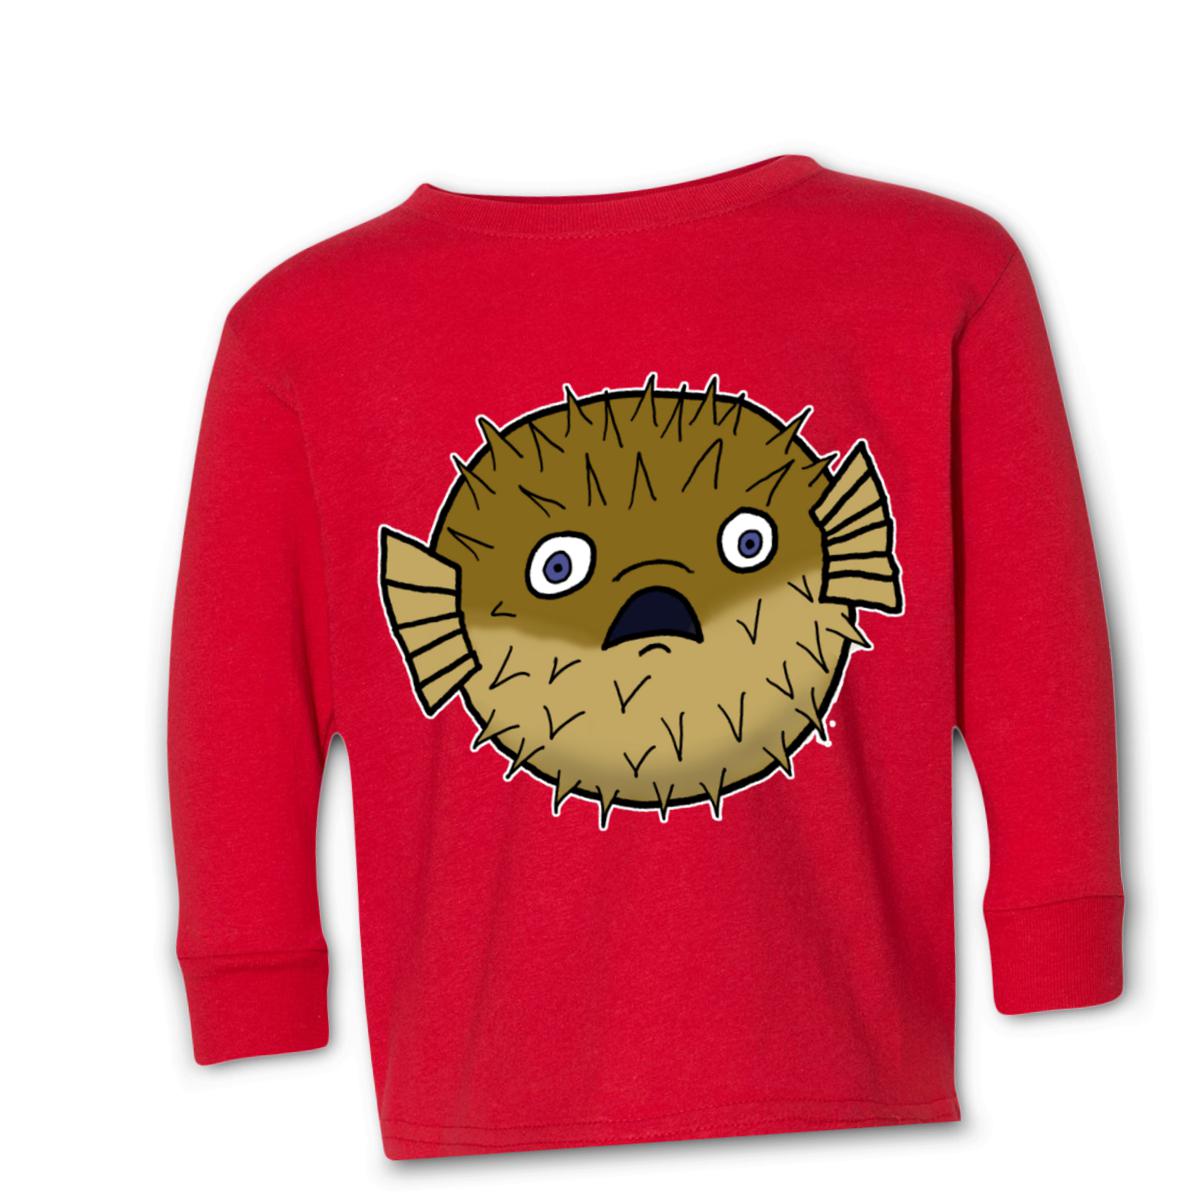 Puffer Fish Kid's Long Sleeve Tee Large red